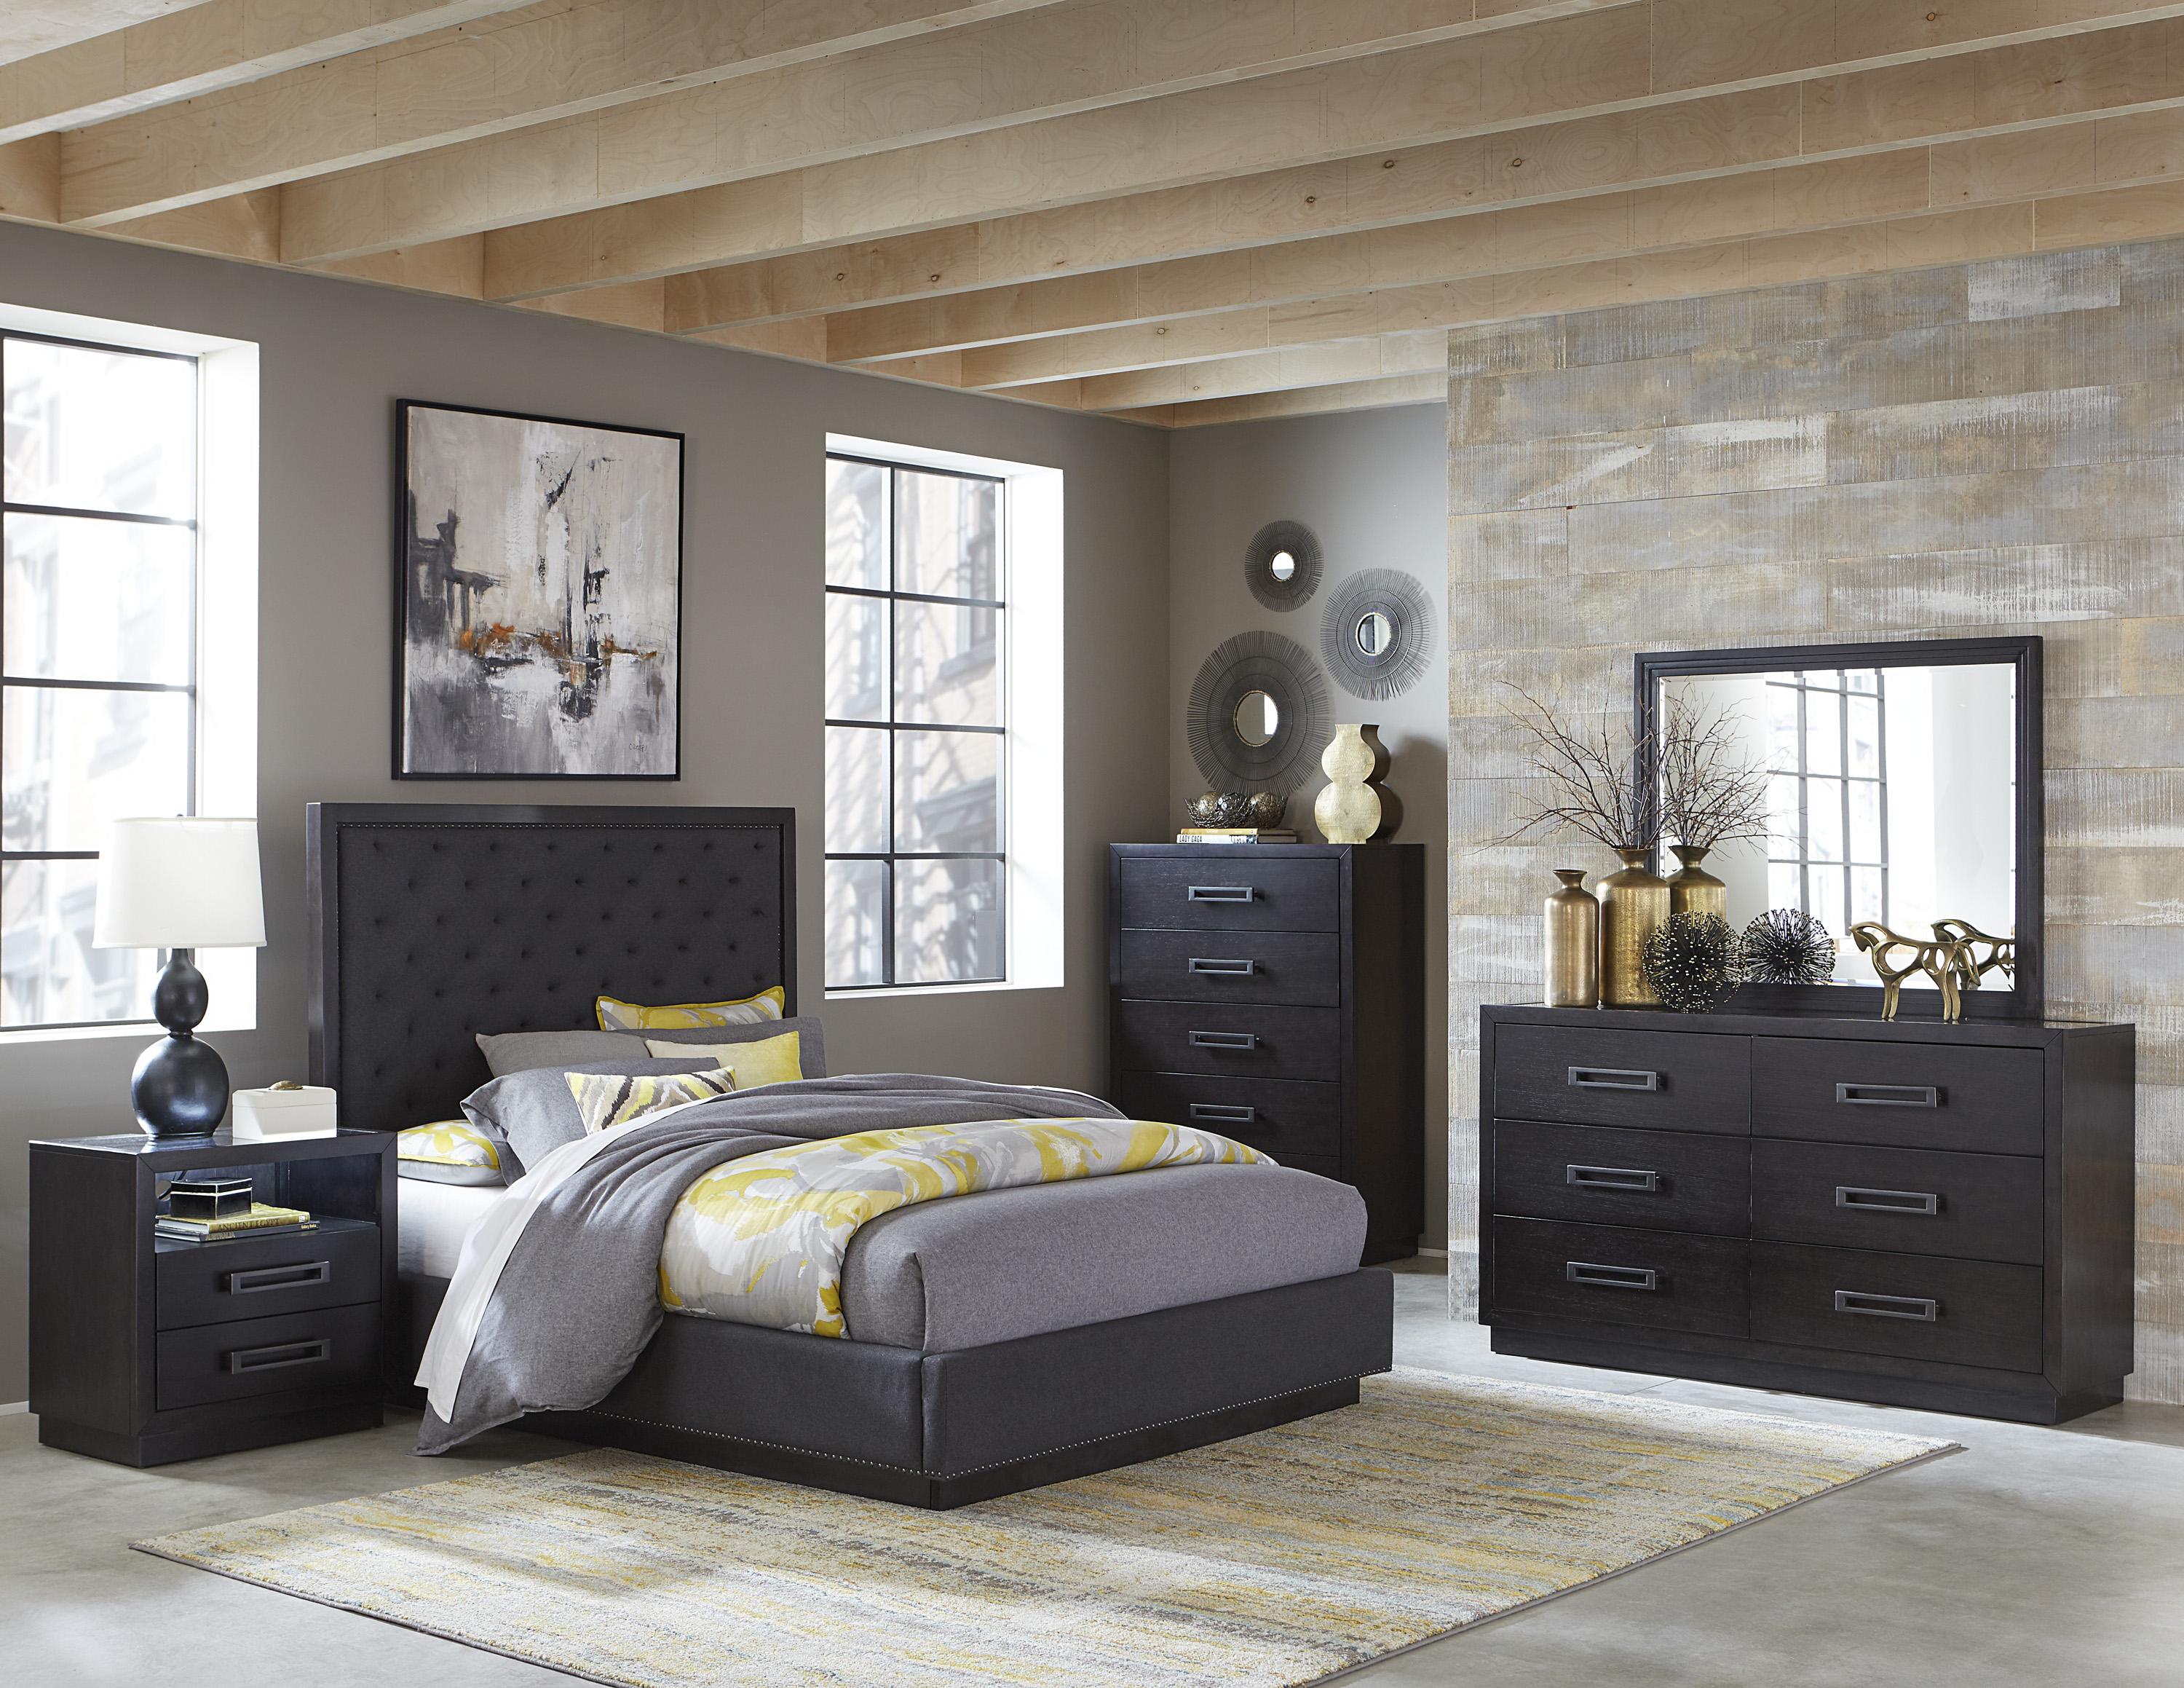 Modern Bedroom Set 5424-1-6PC Larchmont 5424-1-6PC in Charcoal Polyester